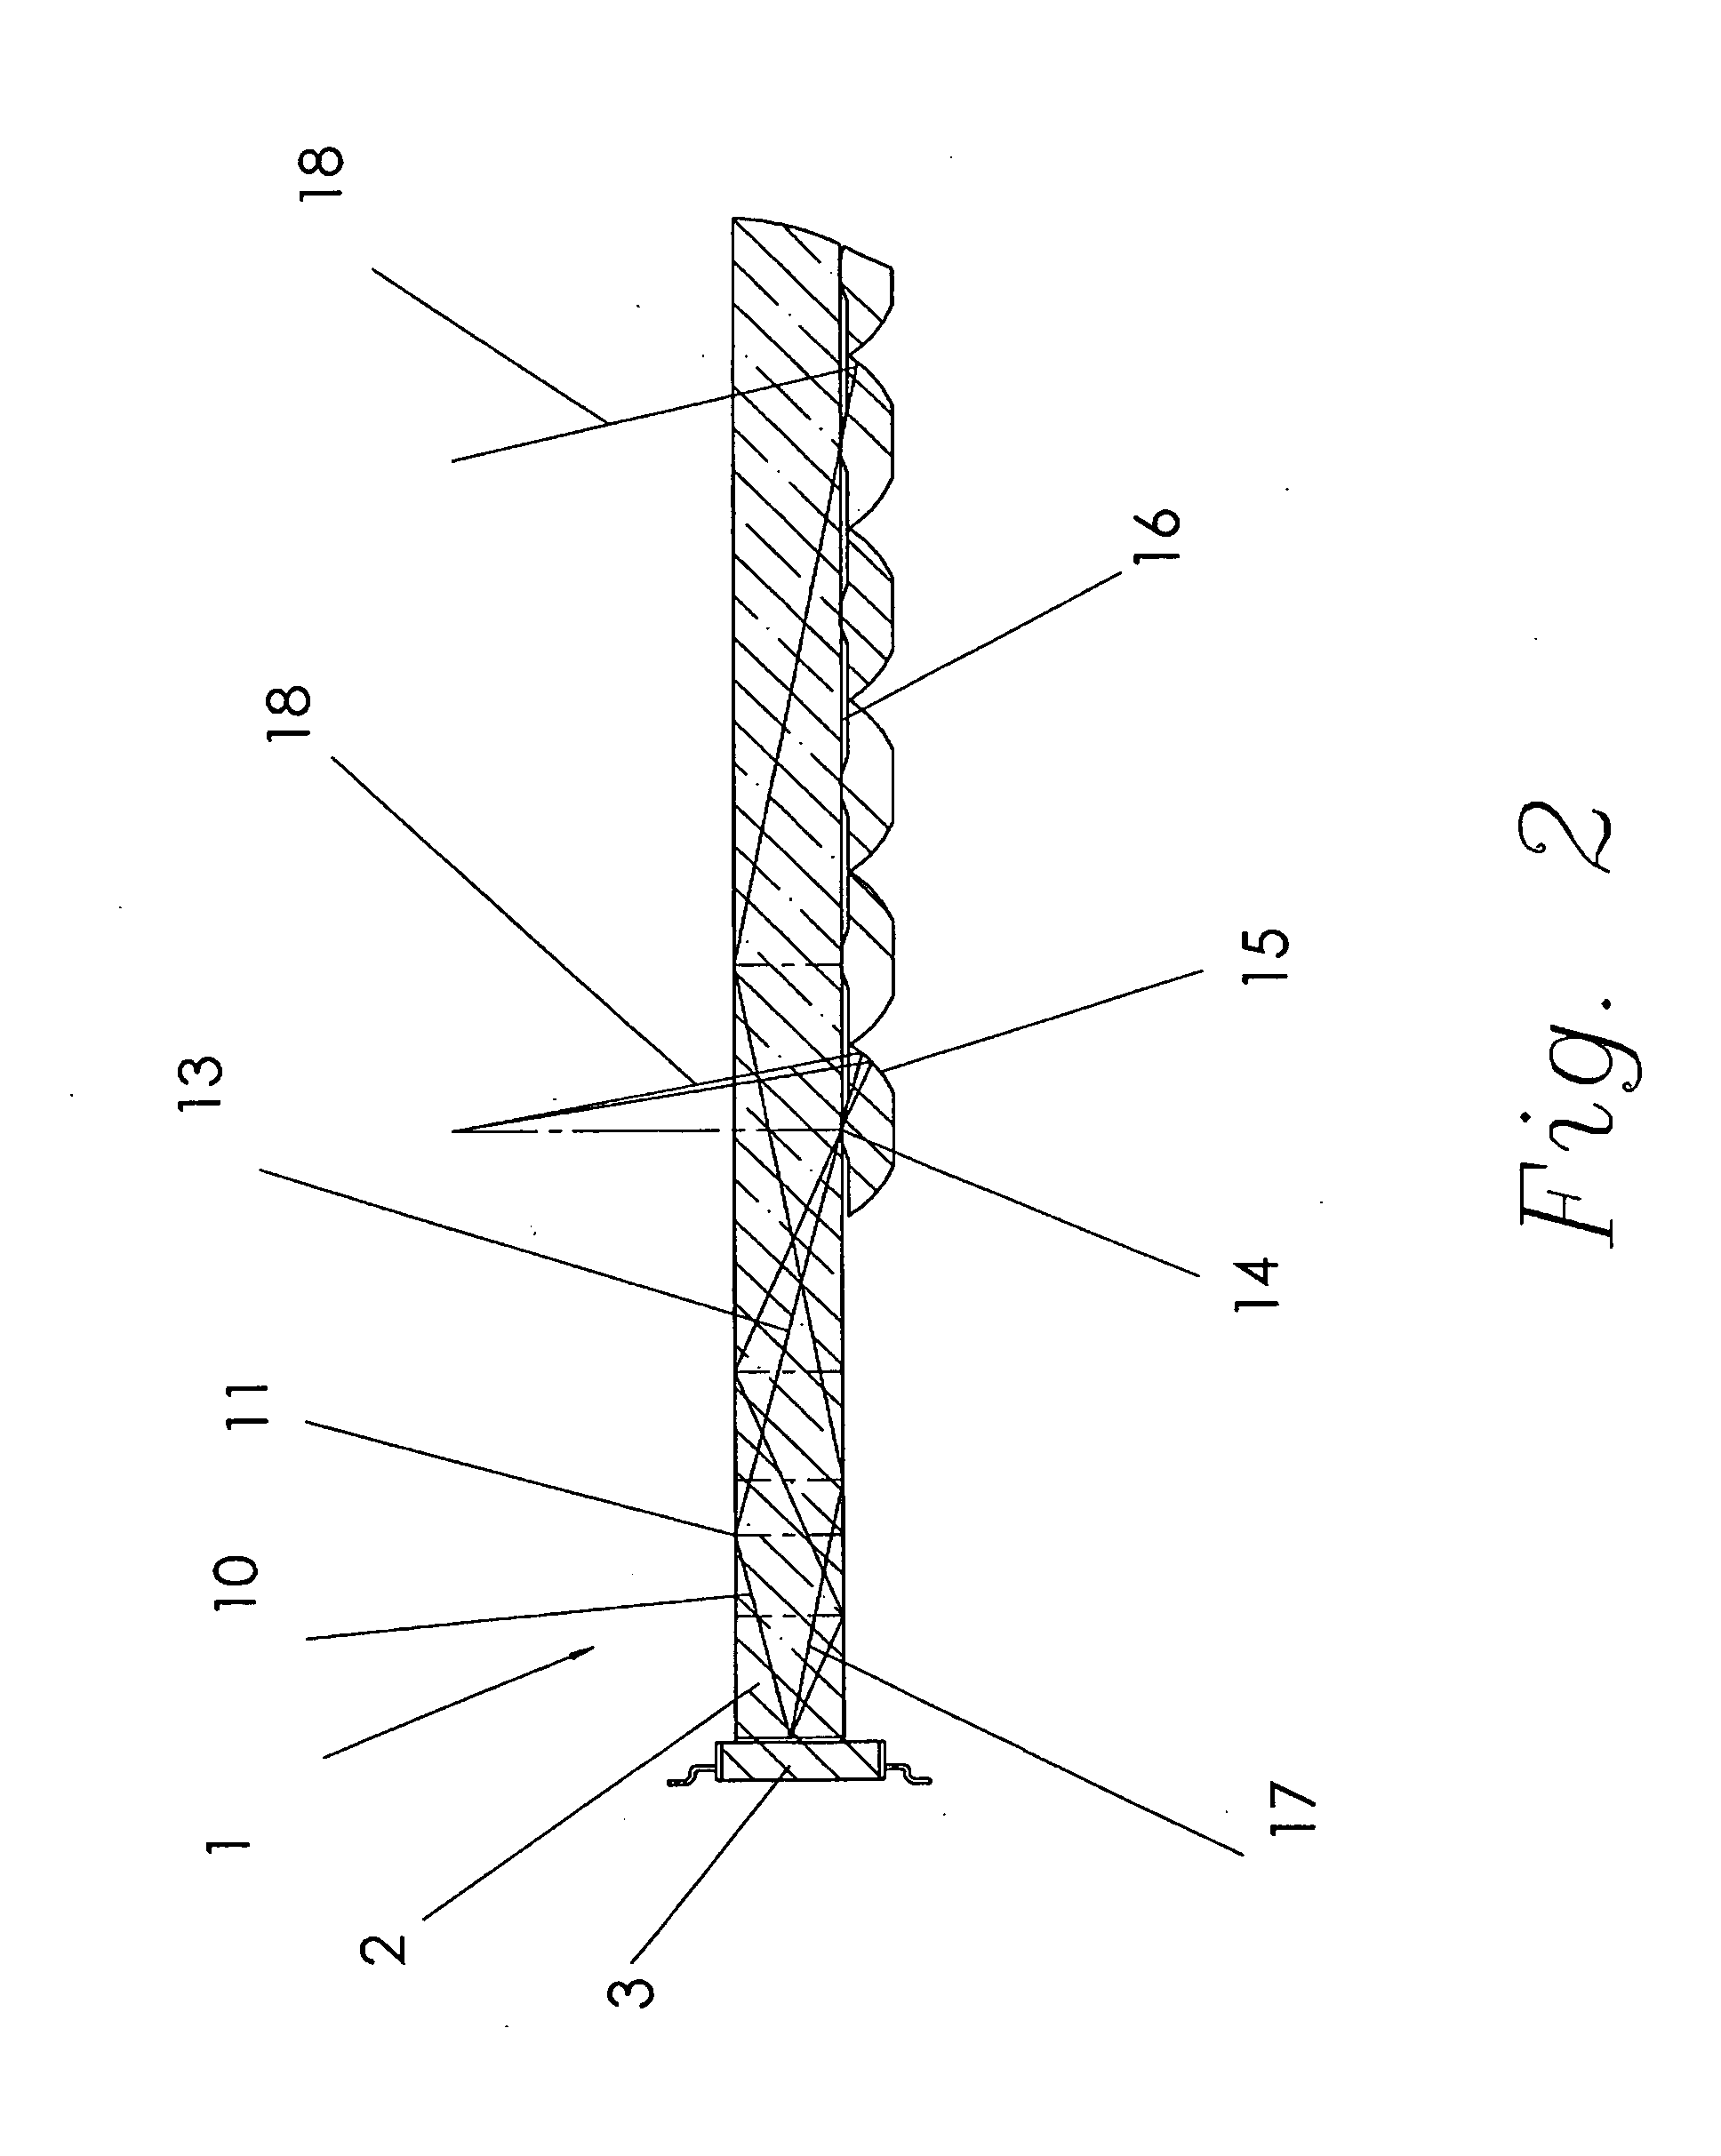 Optic System for Light Guide with Controlled Output